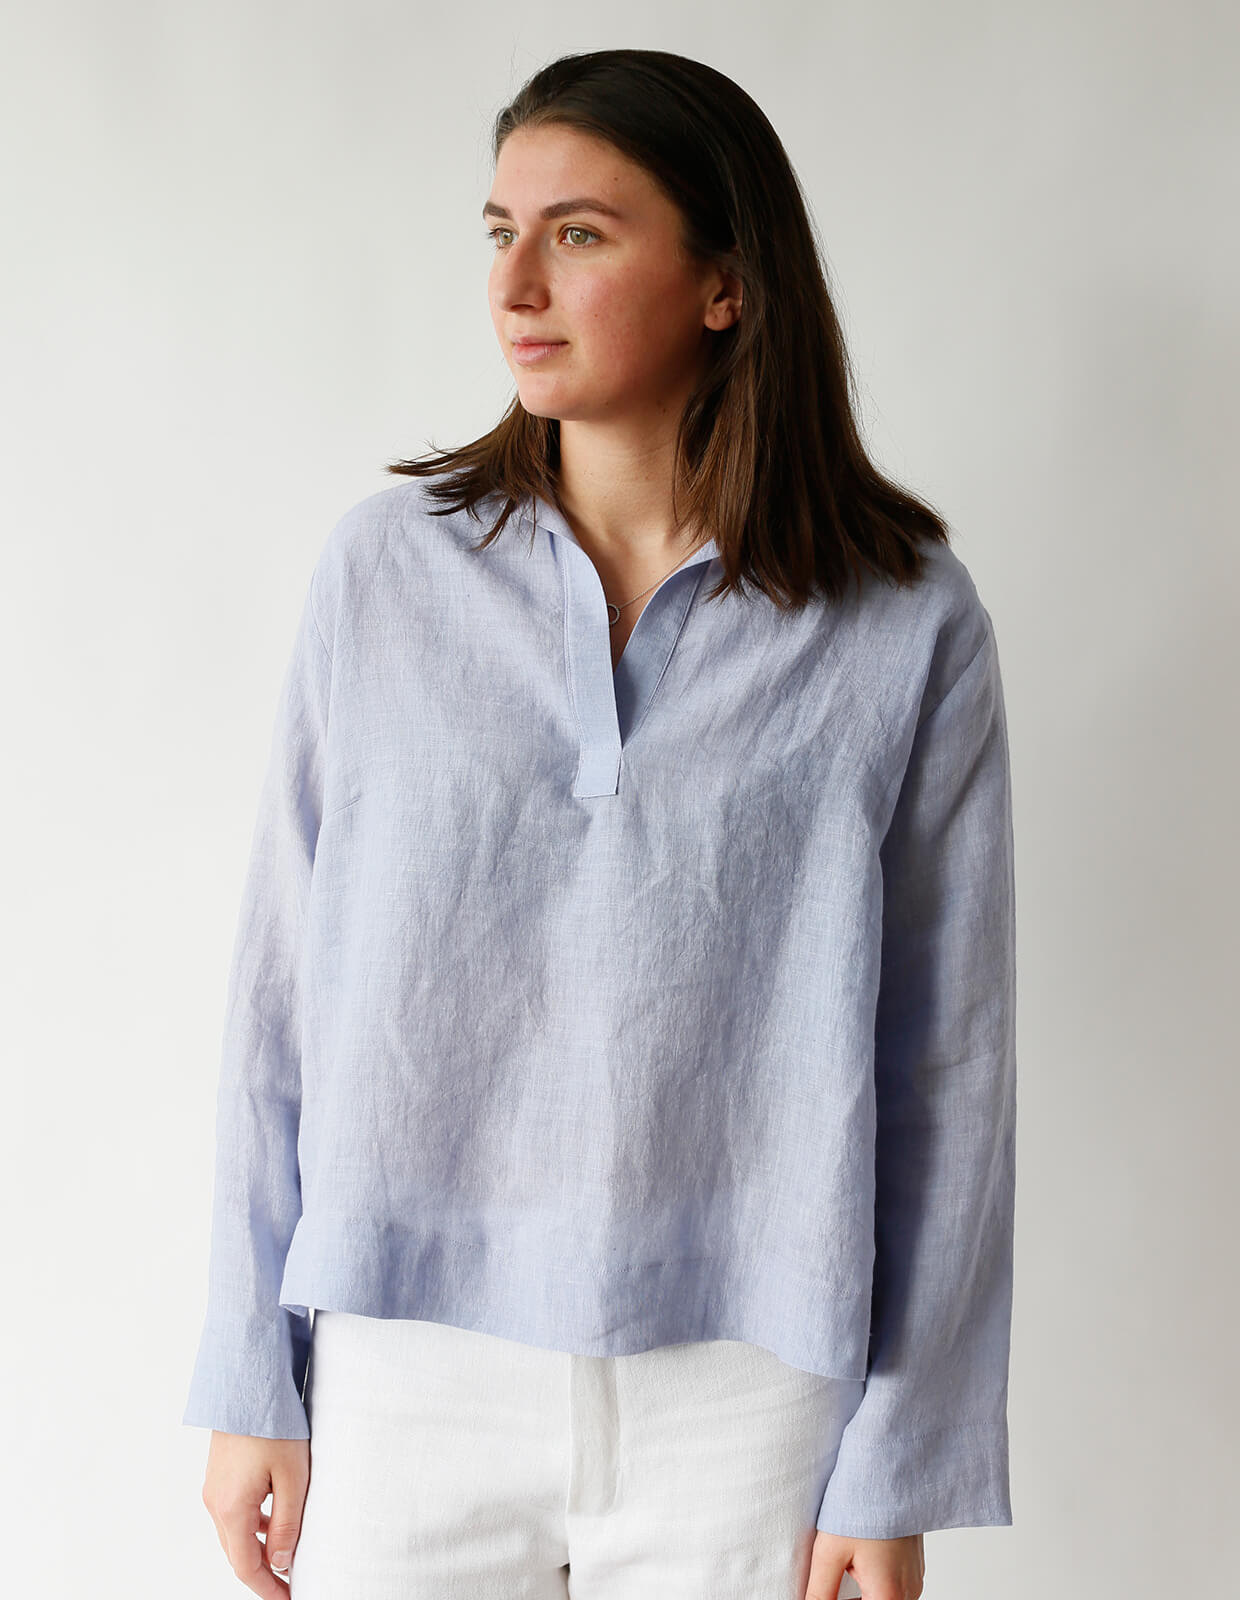 The Maker's Atelier Pull-on Shirt - The Fold Line